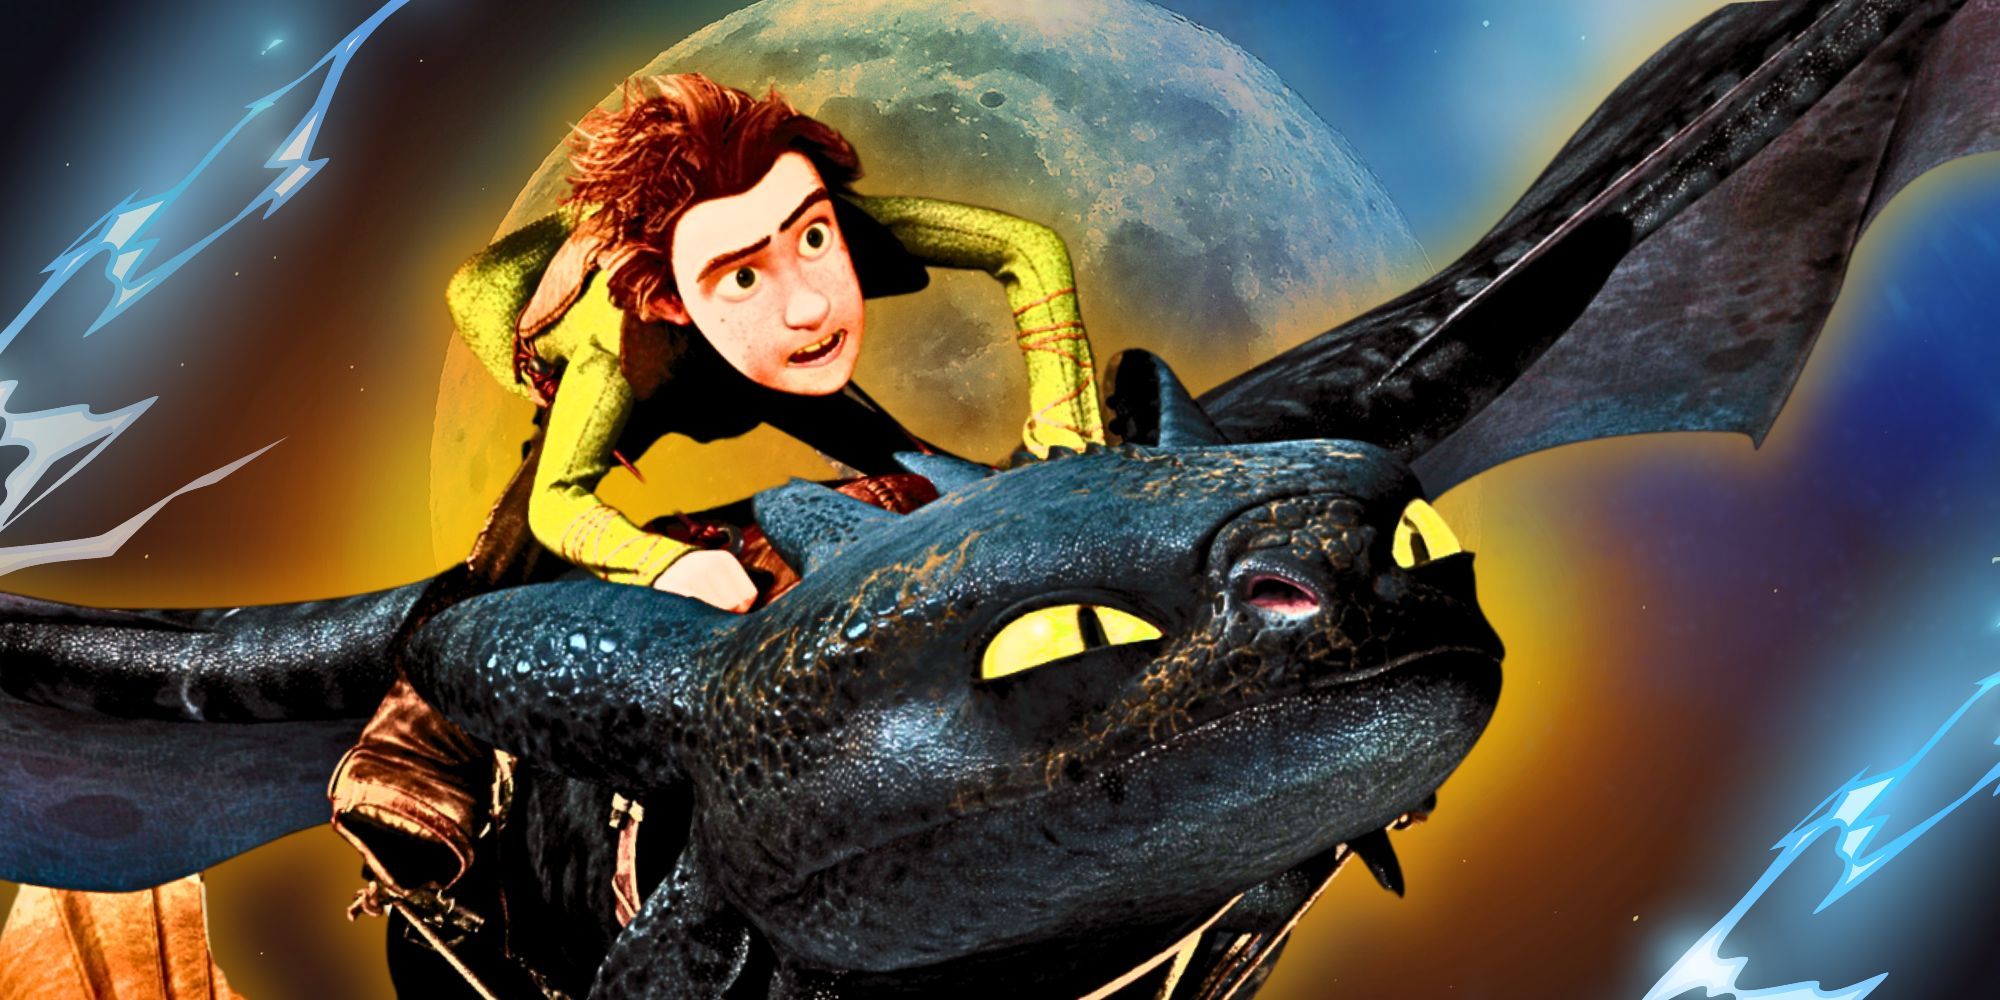 How To Train Your Dragon live-action: Everything we know - Dexerto